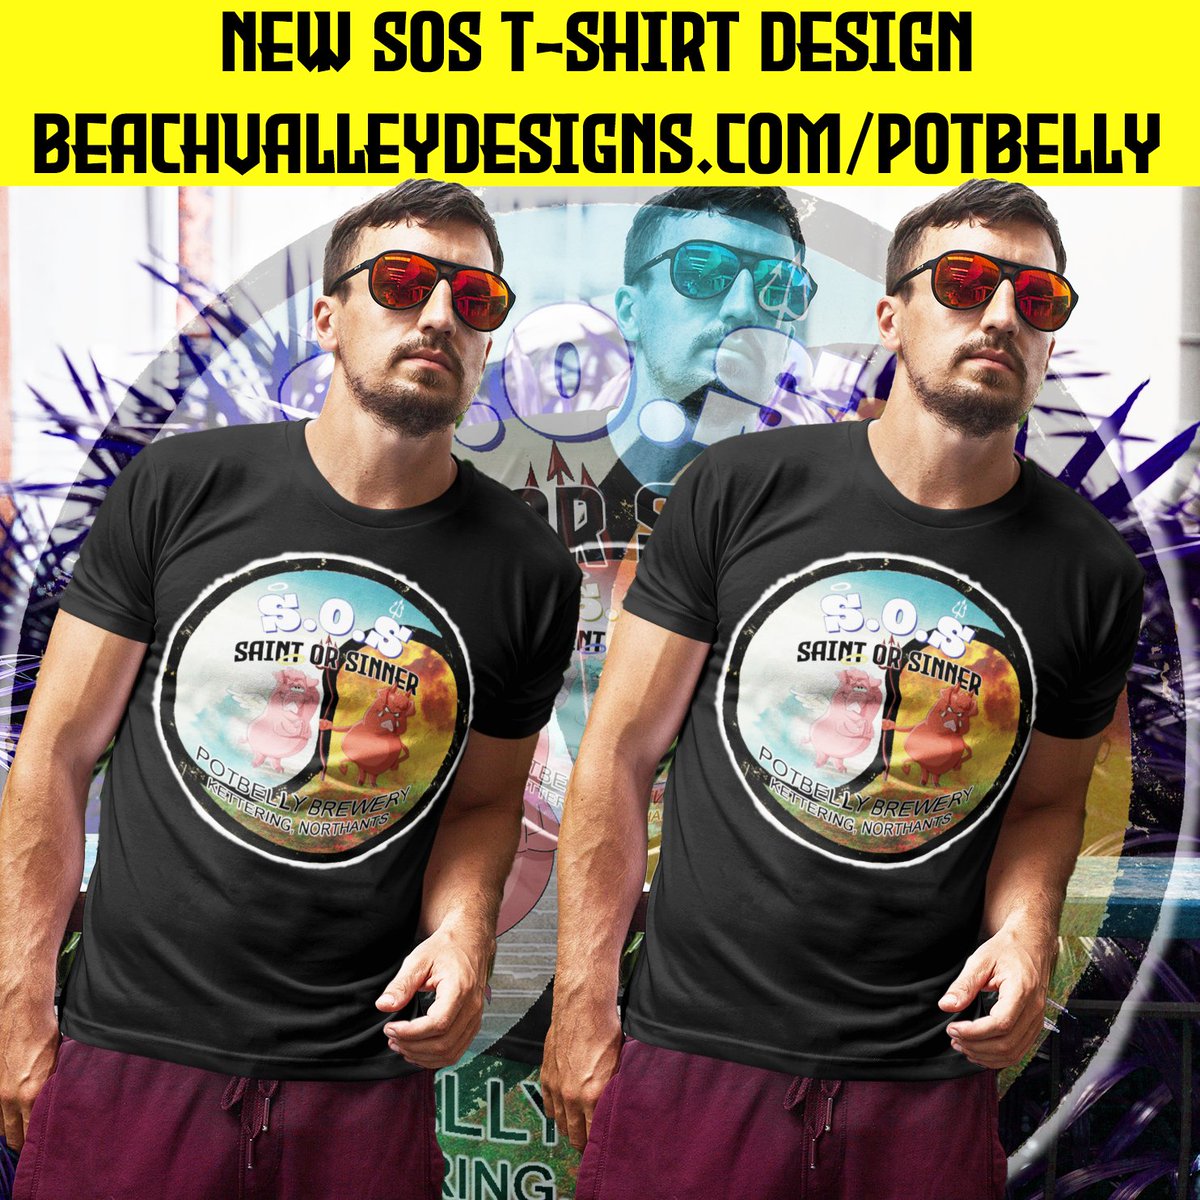 NEW SOS T-SHIRT DESIGN

beachvalleydesigns.com/potbelly

#sos #t #tee #tshirt #palms #glasses #kewl #sale #merch #strongbeer #beer #realale #camra #potbelly #brewery #clothing
#ruby #red #rubyred #ad #inflation